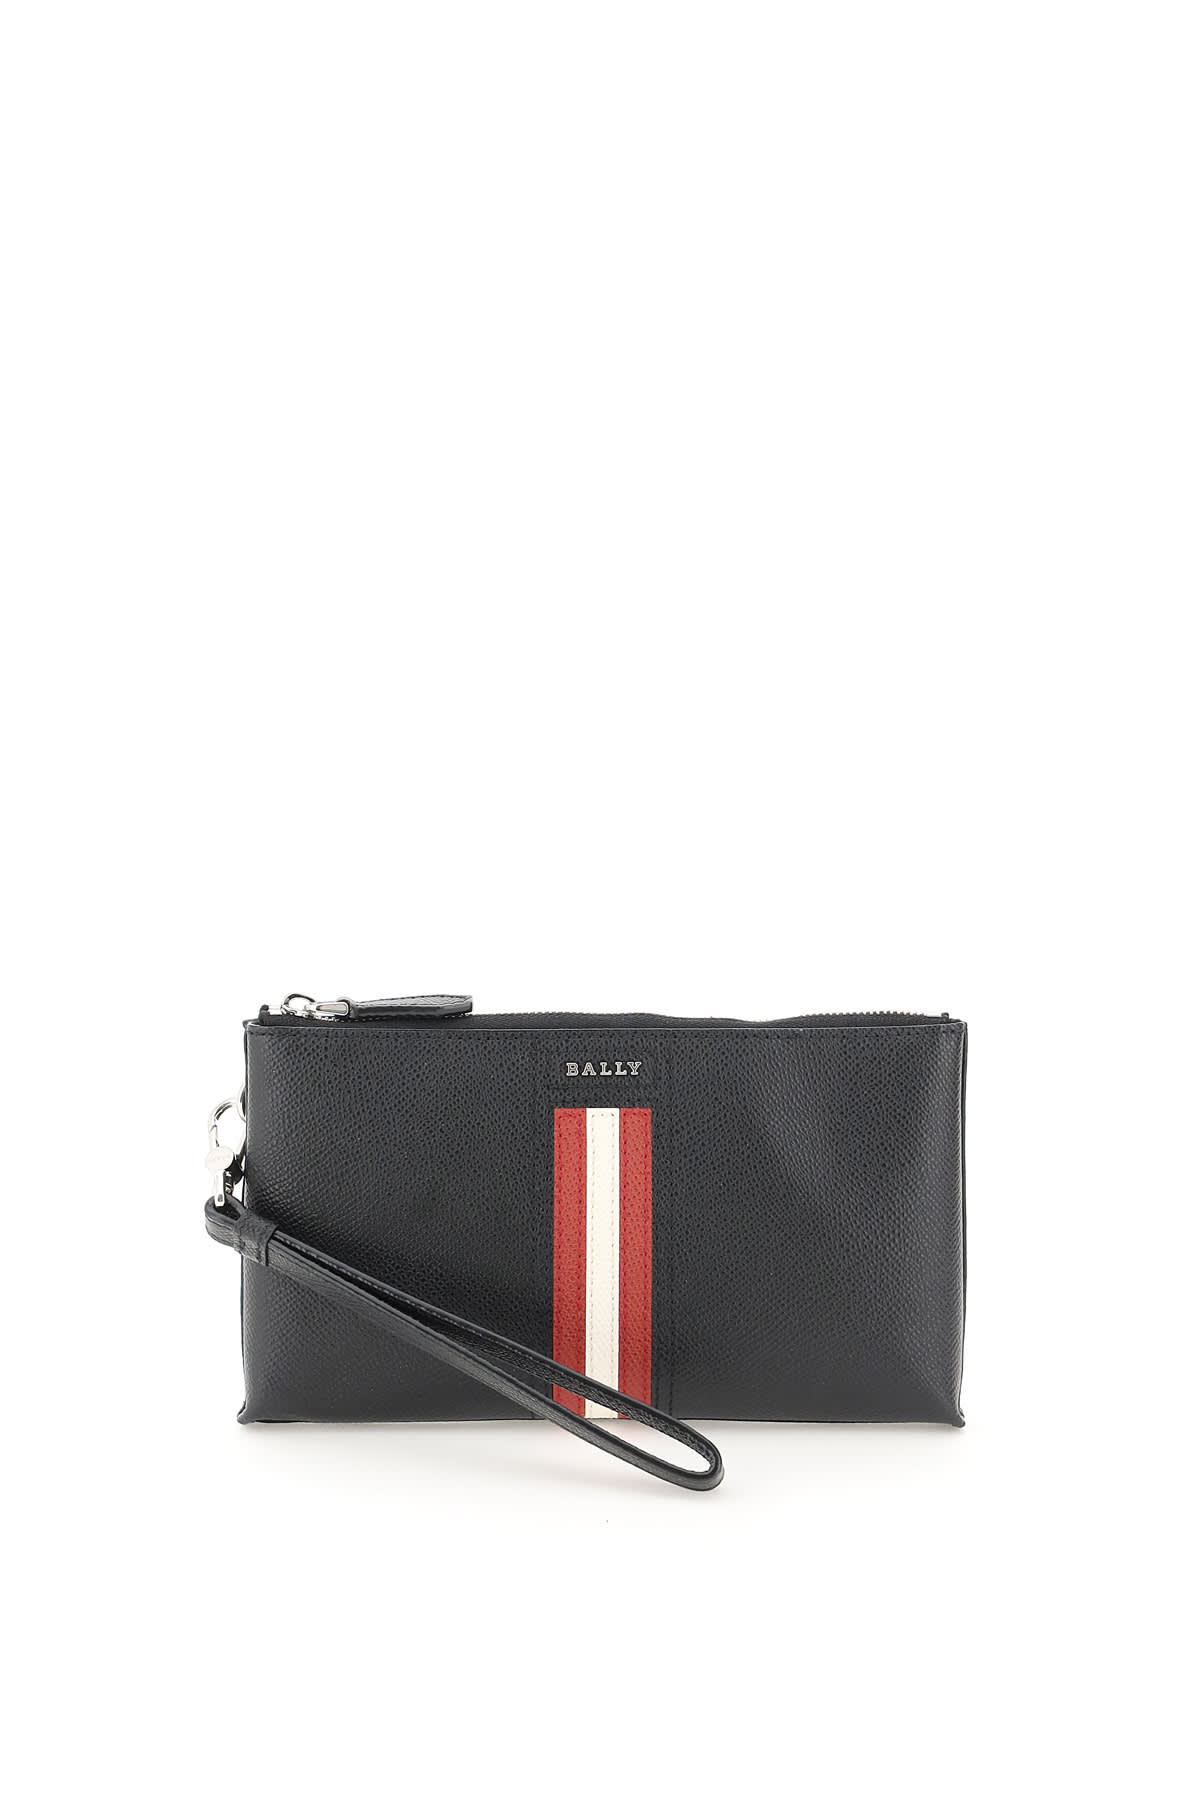 Bally Teryer Leather Pouch